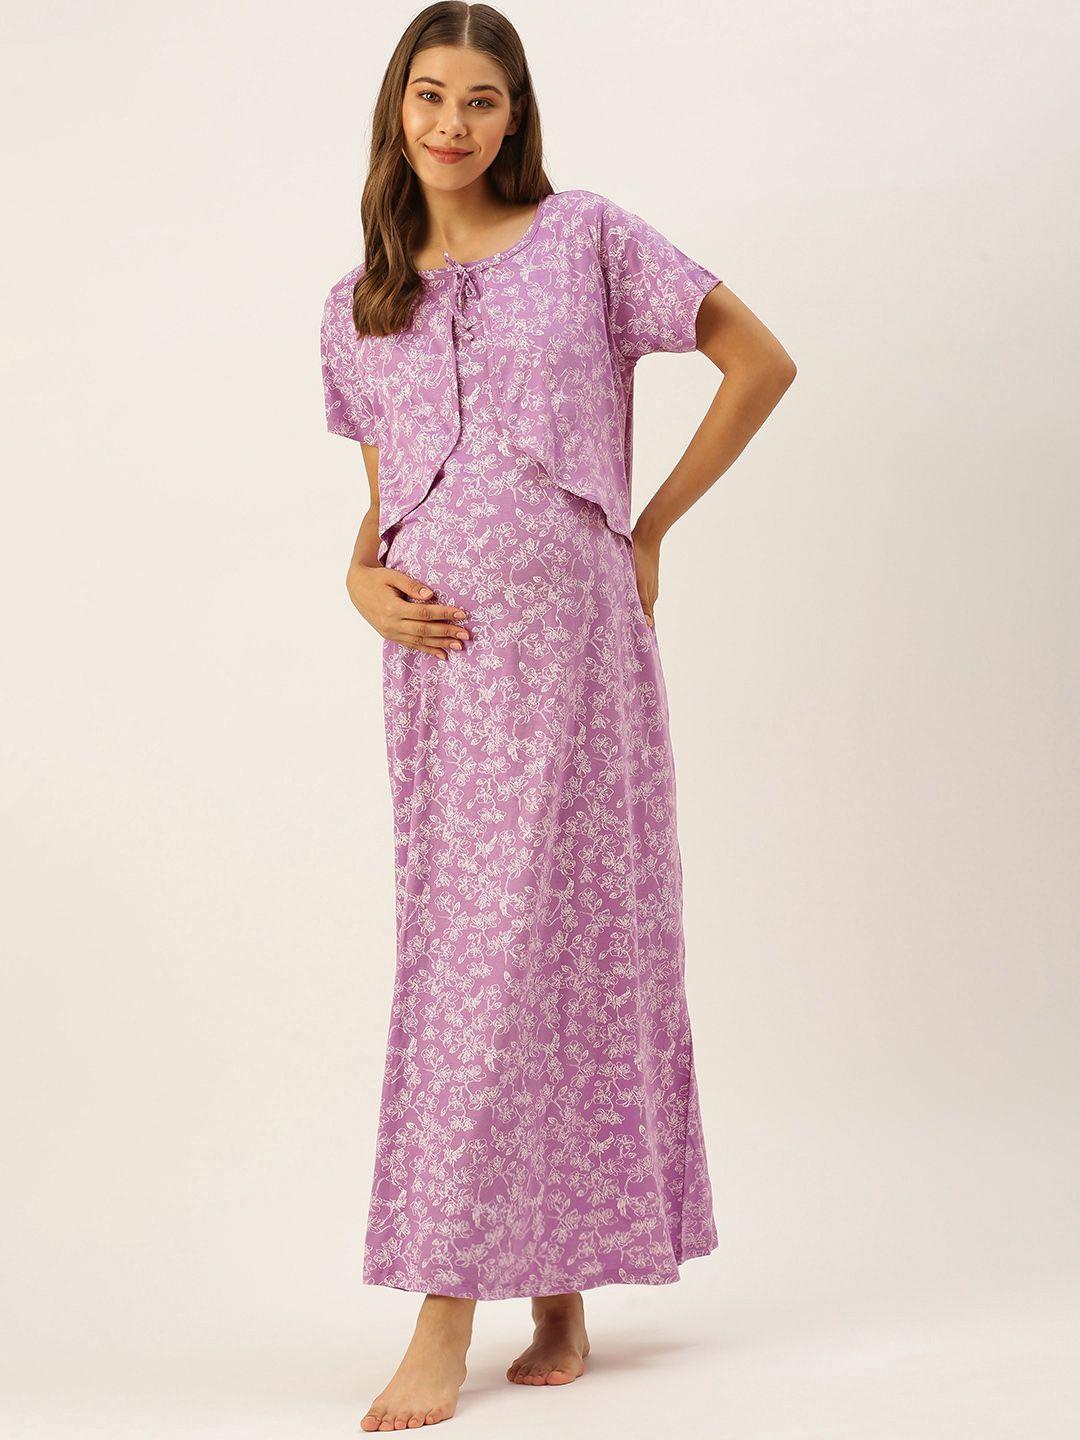 nejo lavender & white floral printed bow detail layered cotton maxi maternity nightdress